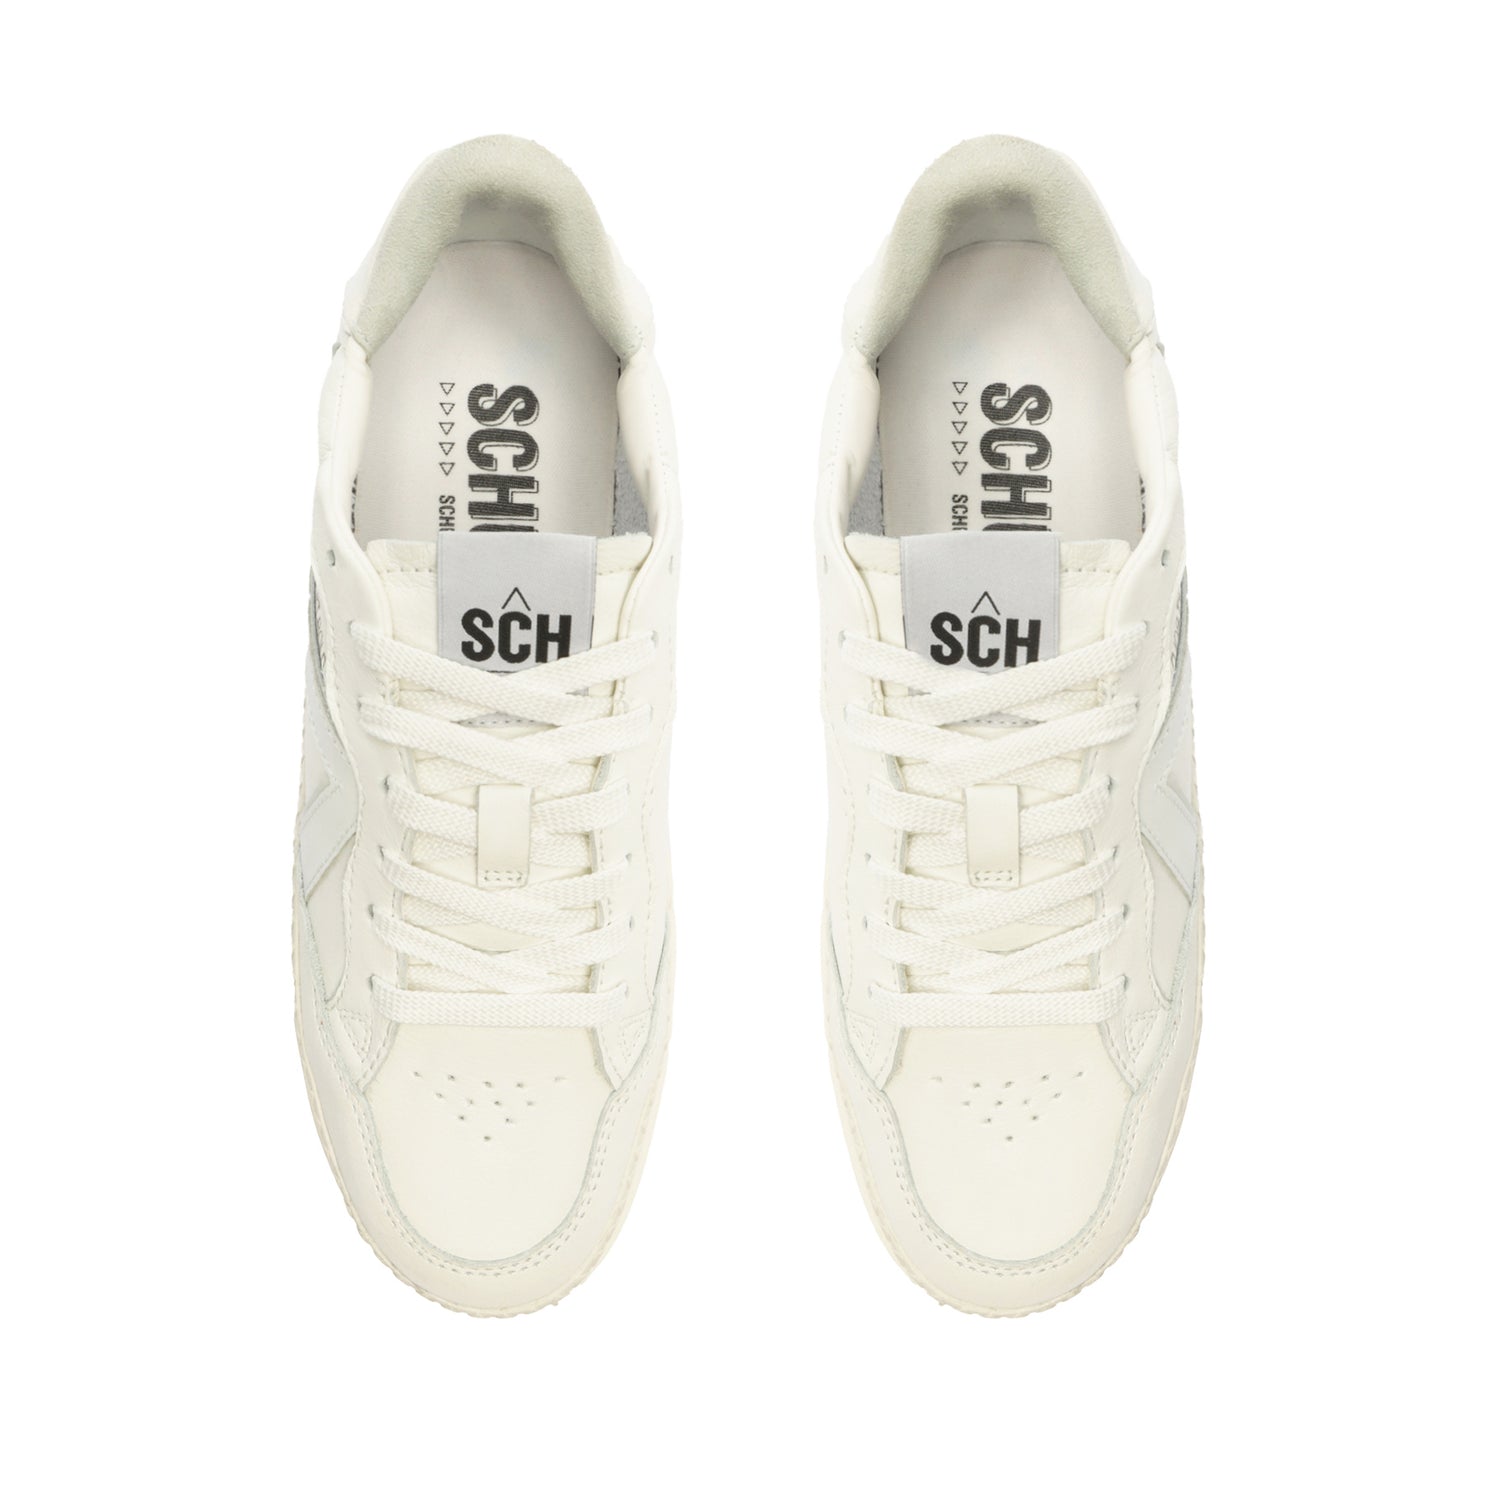 ST-BOLD Leather Sneaker Sneakers Spring 24    - Schutz Shoes